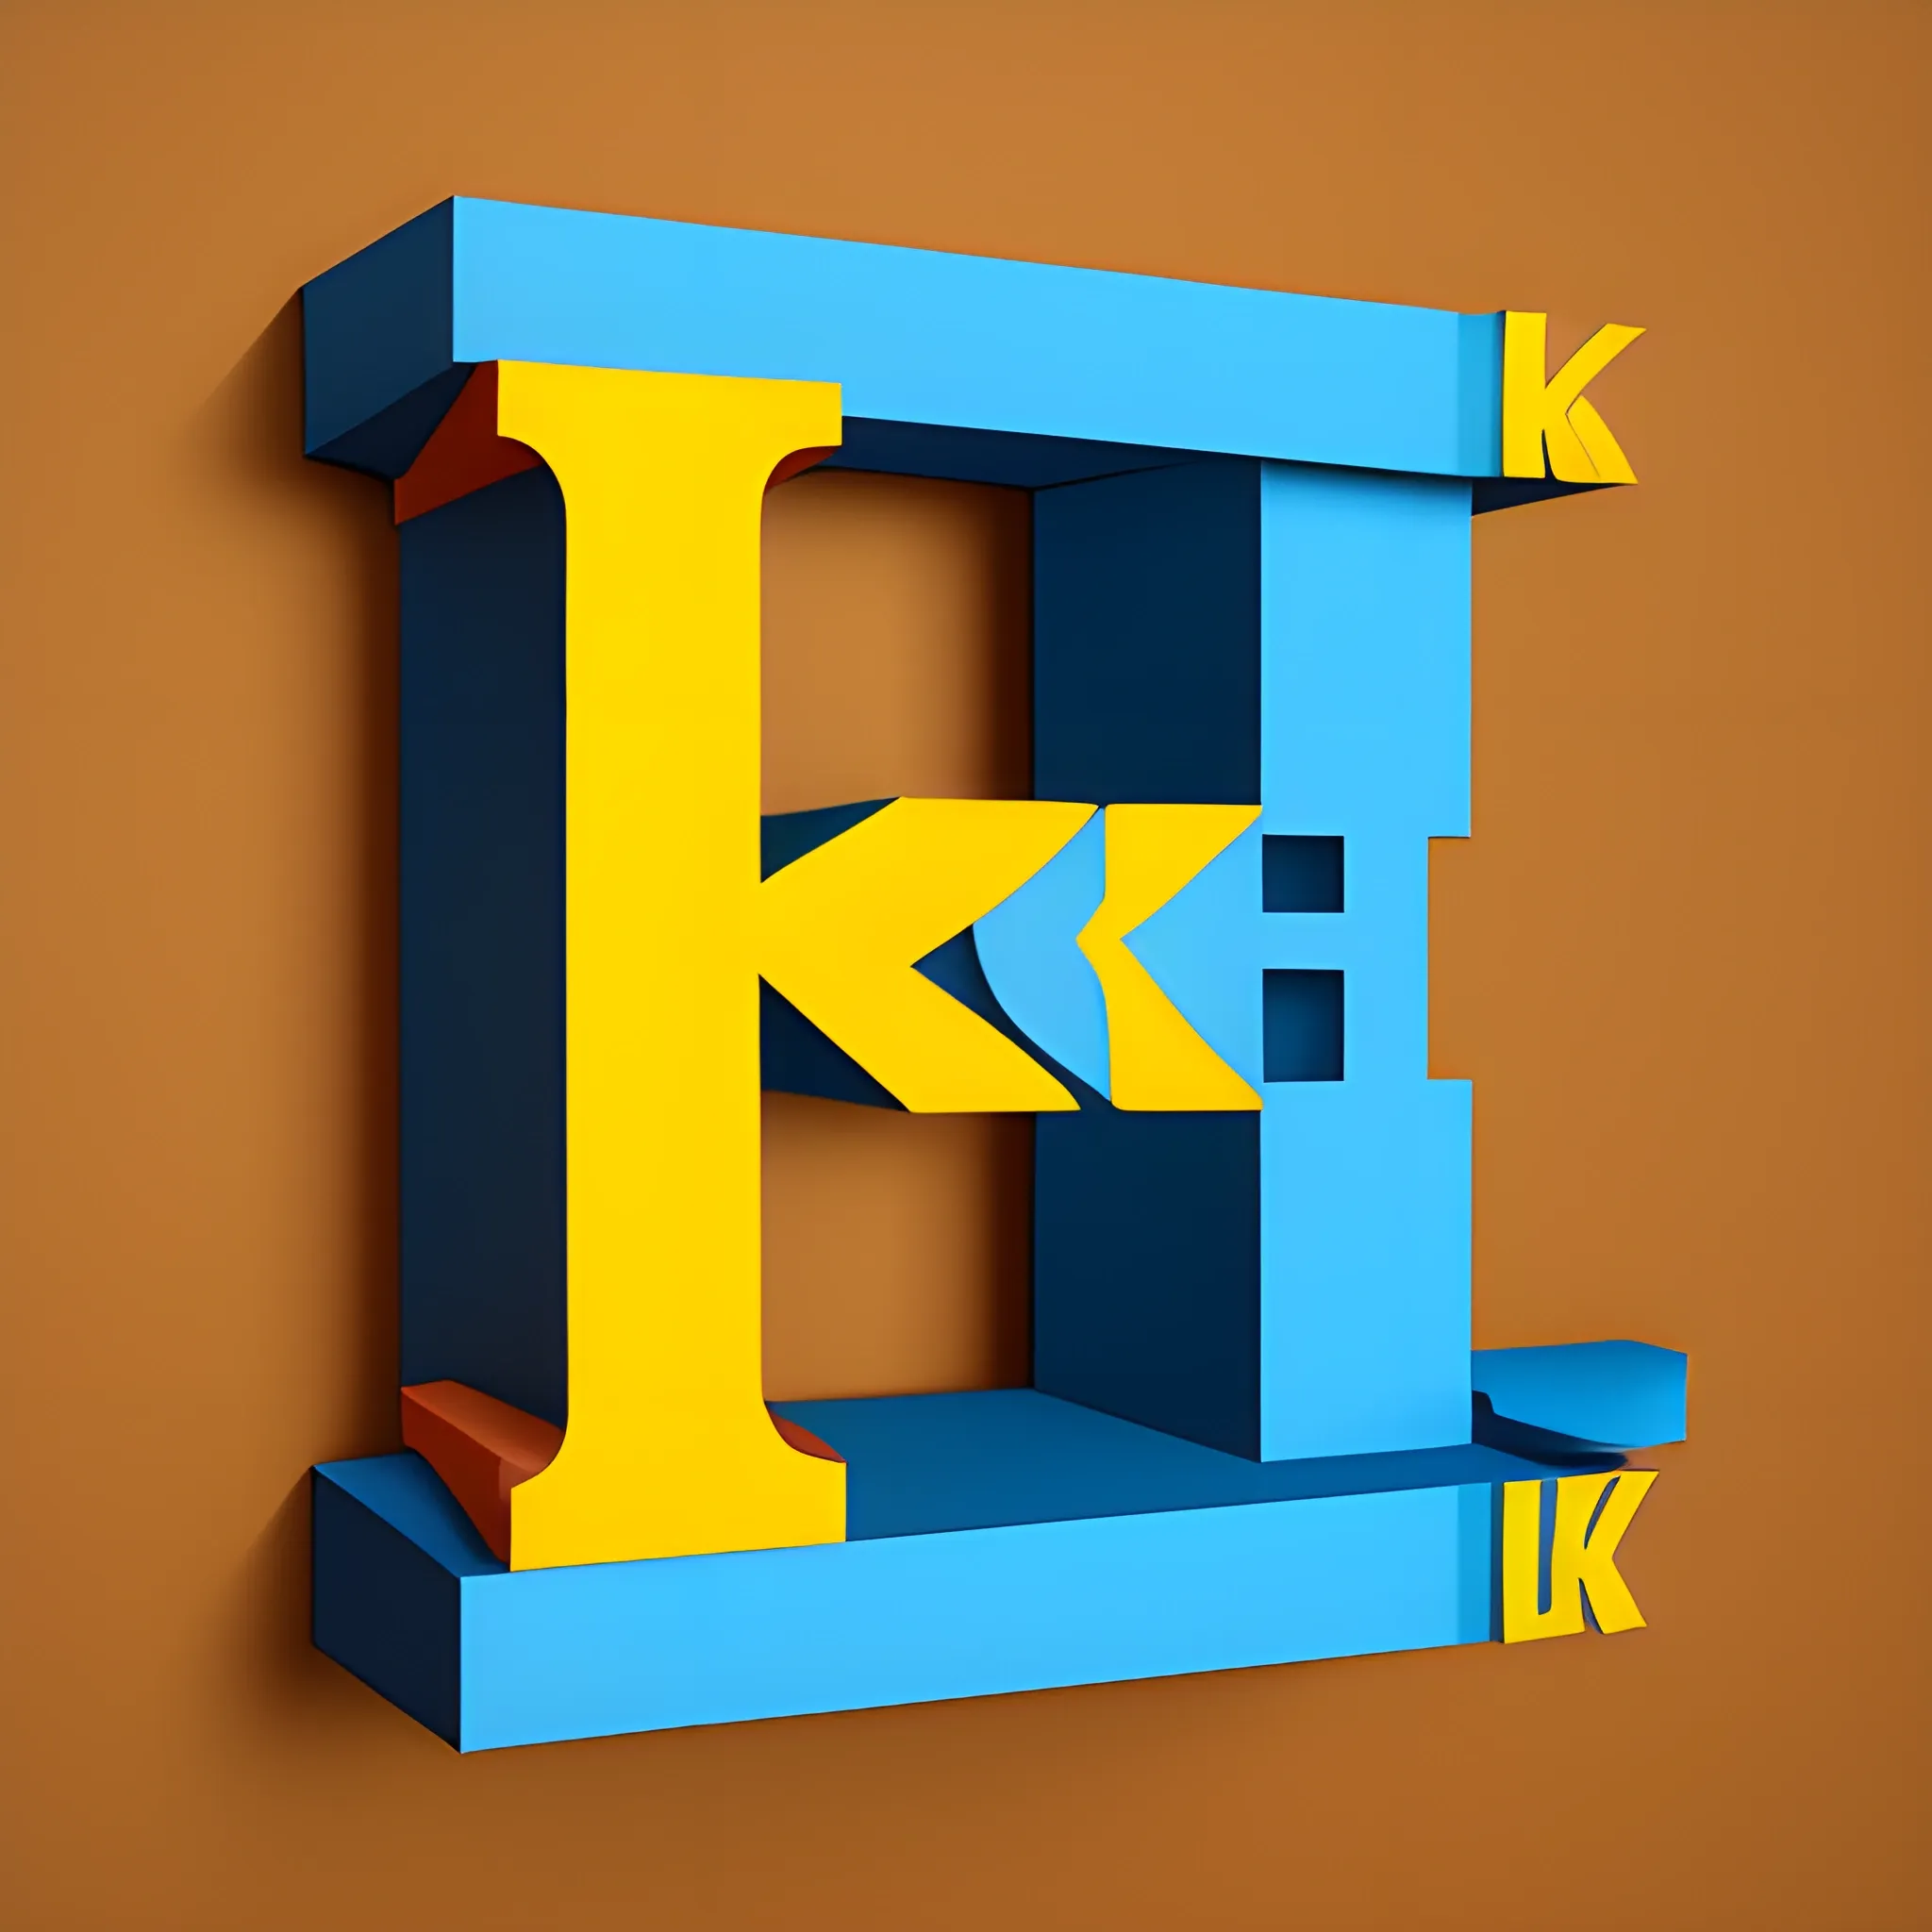 make art with using the letter K and the letter M in 3D style